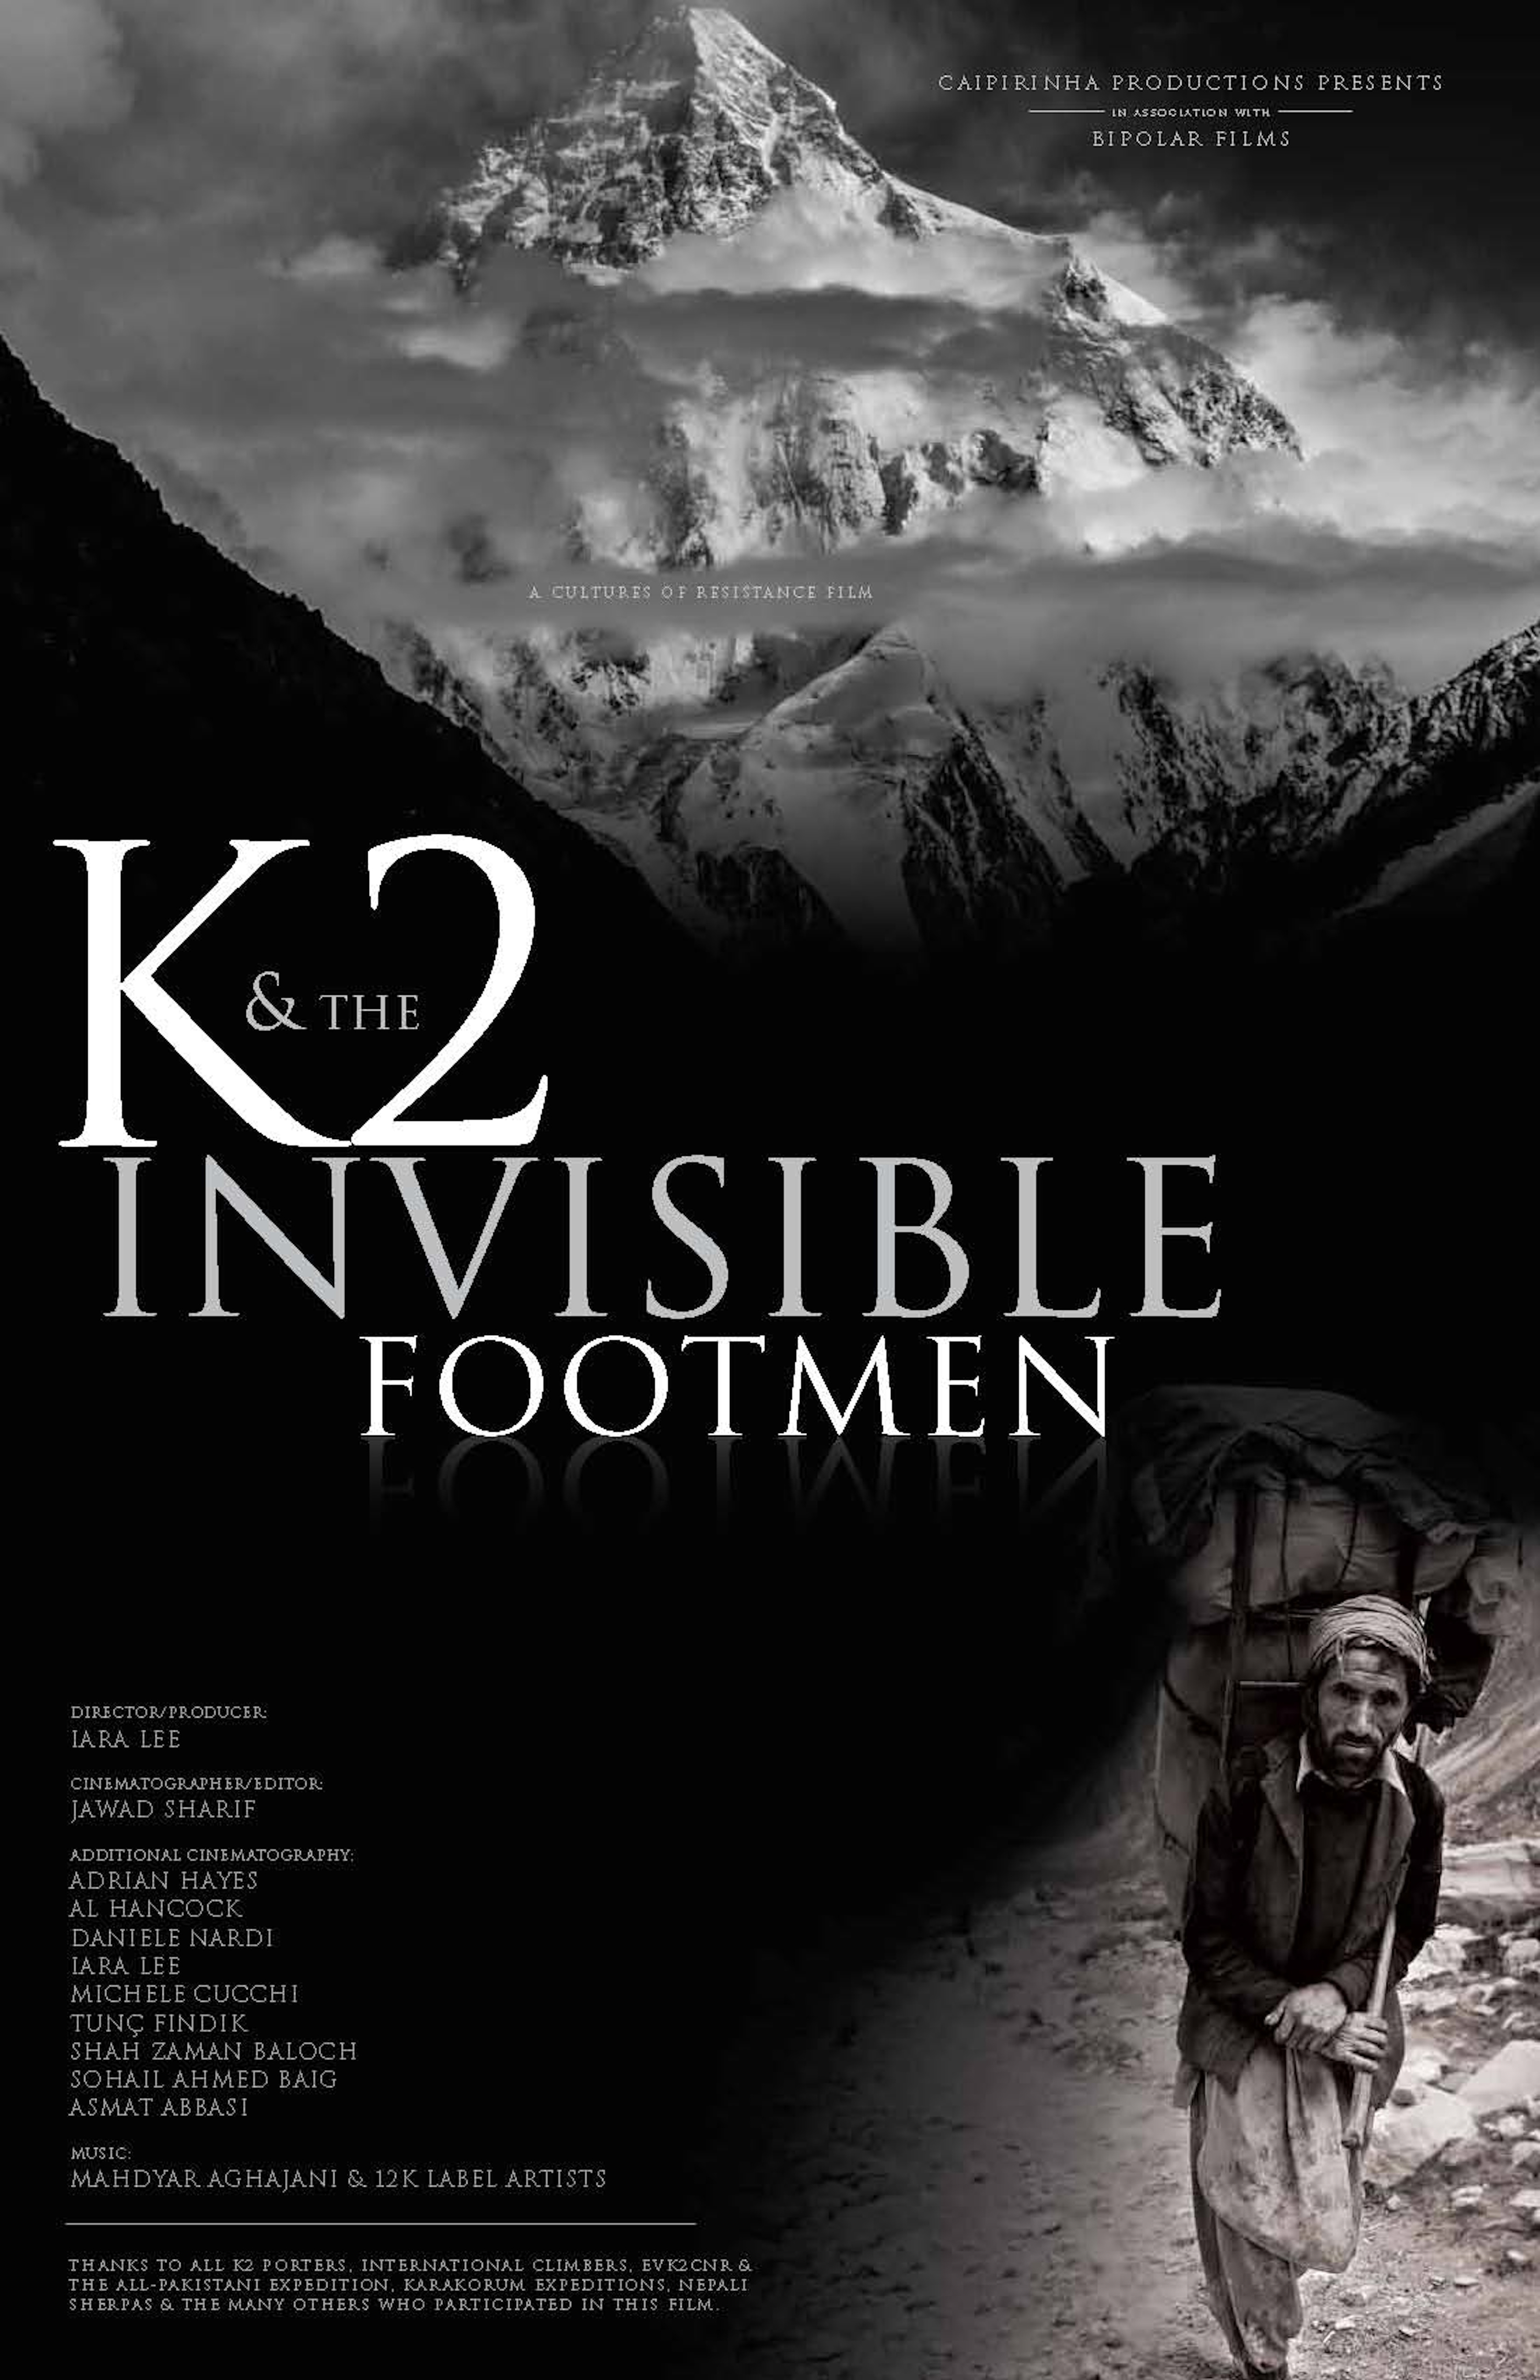 K 2 and The Invisible Footman